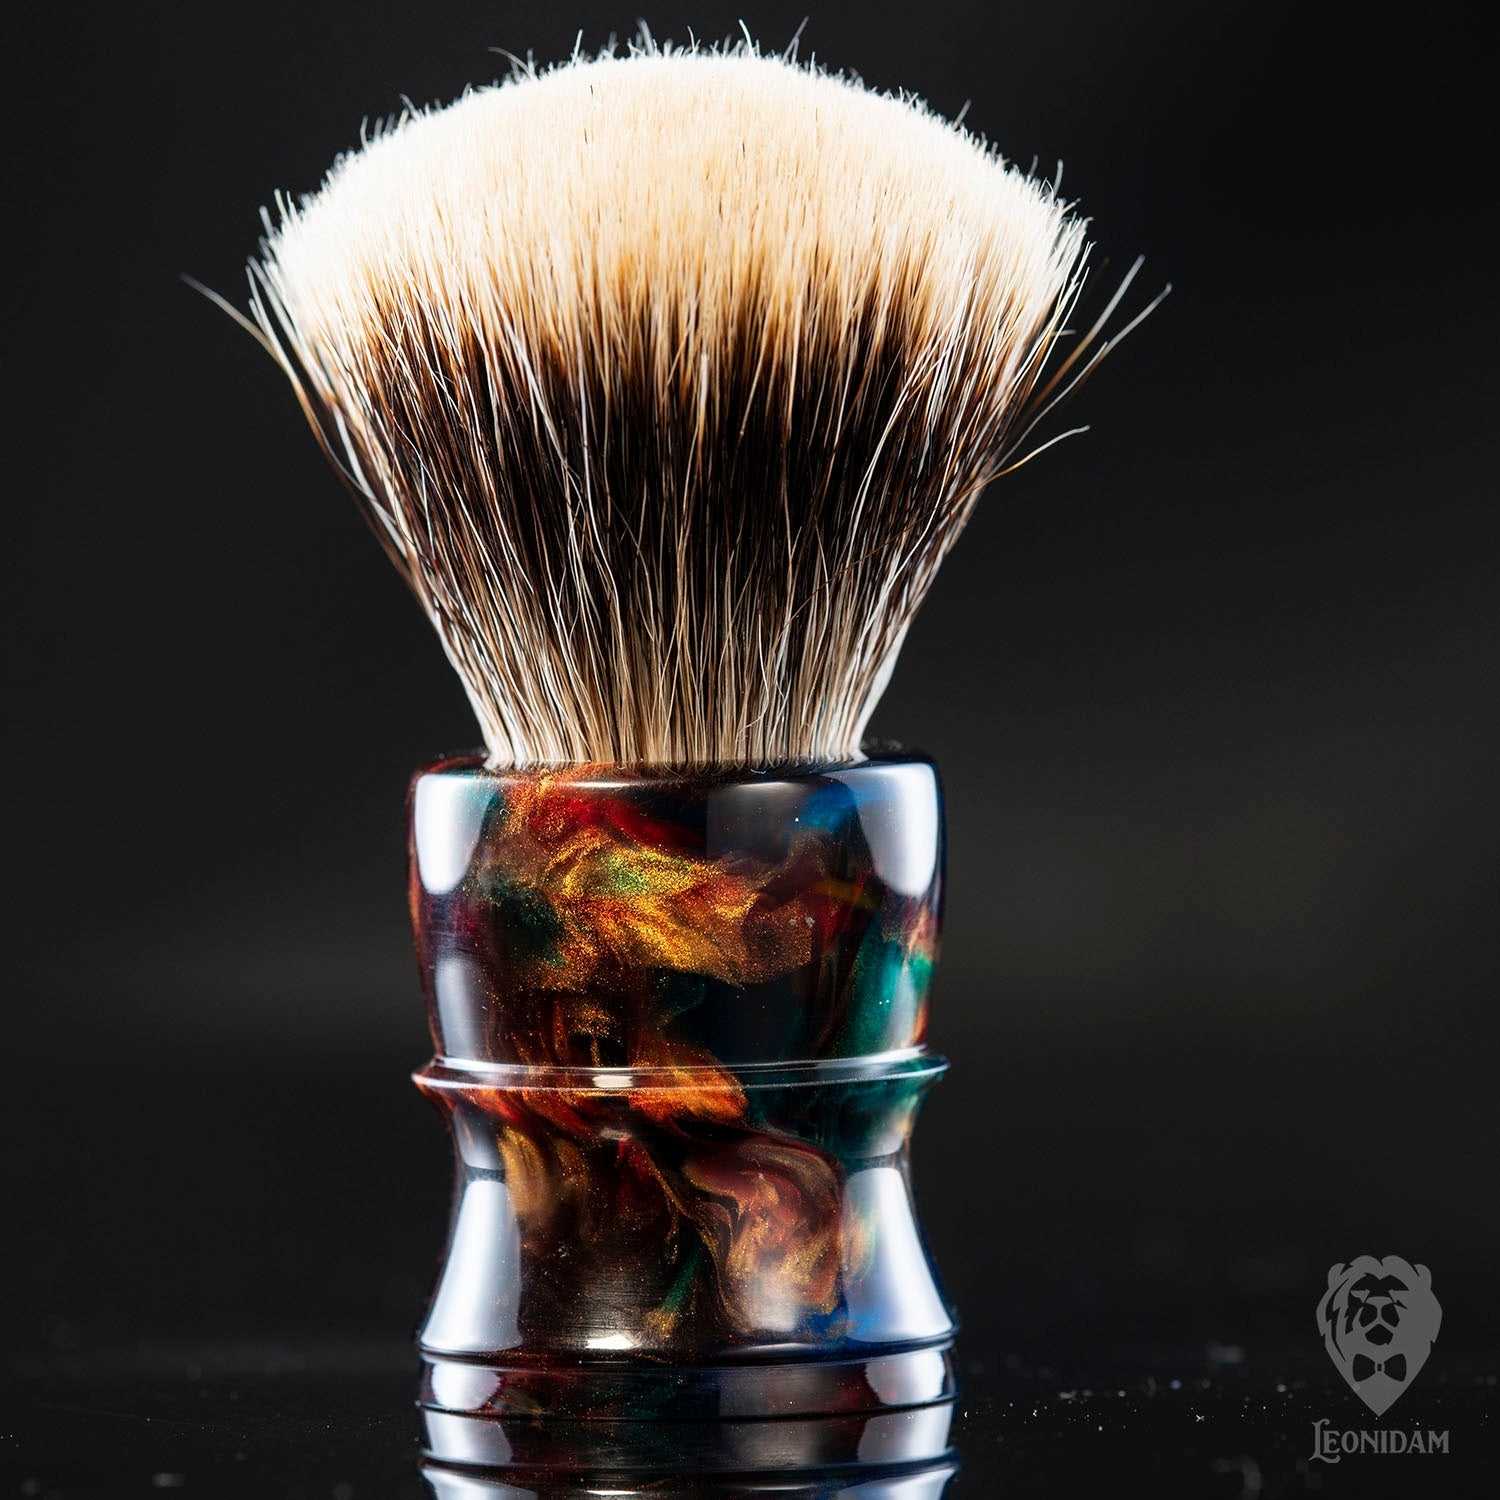 Handmade shaving brush "Phoenix", with blue, red and gold hand poured resin handle. 